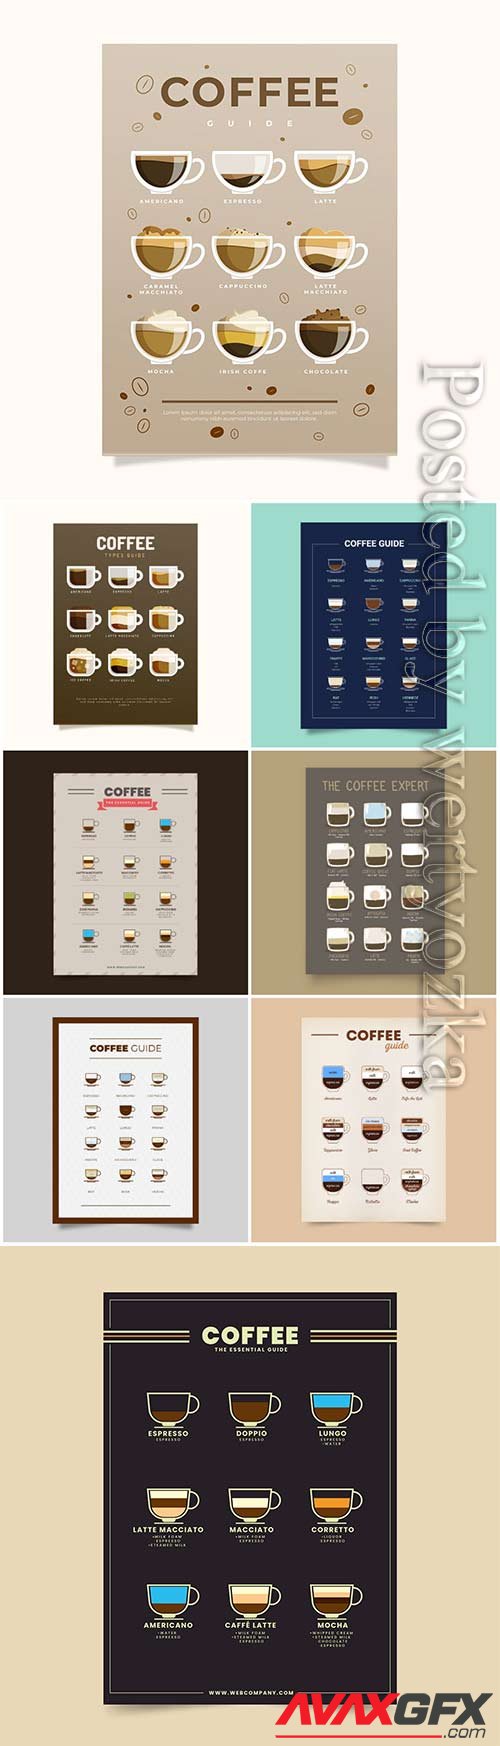 Coffee selection vector poster